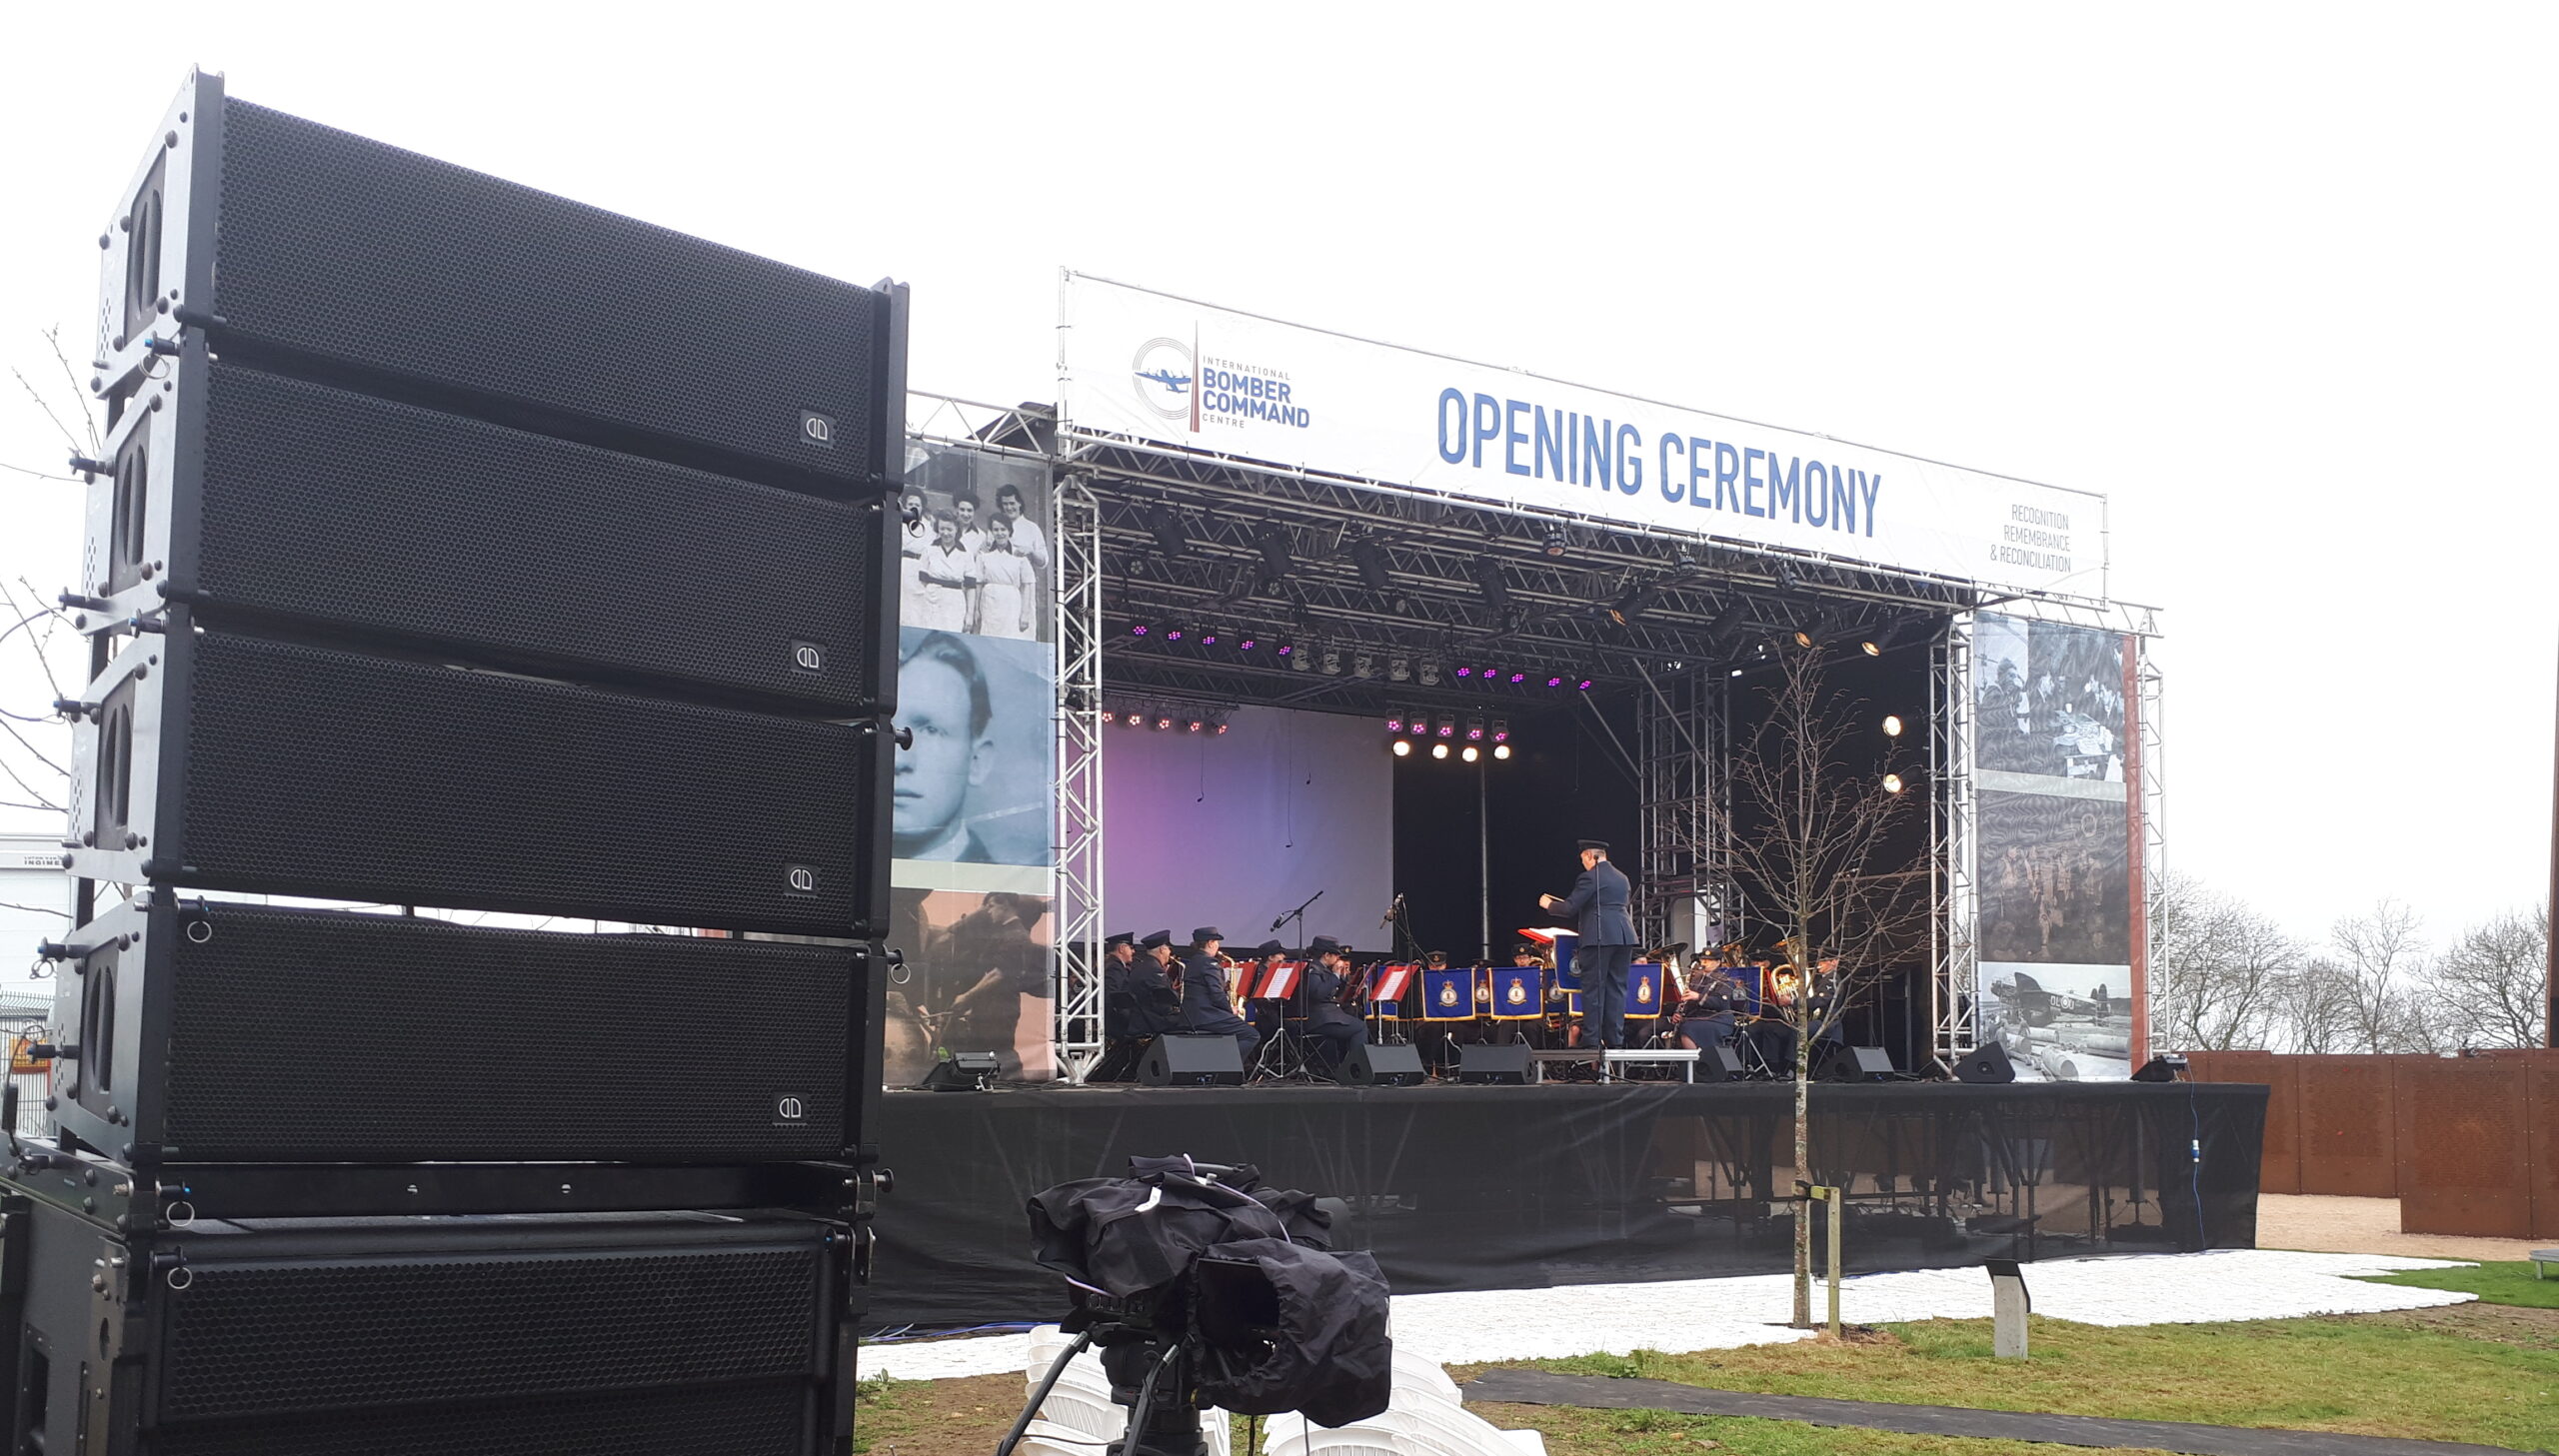 PA system in ground stack configuration in use at the prestigious International Bomber Command Centre Opening Ceremony